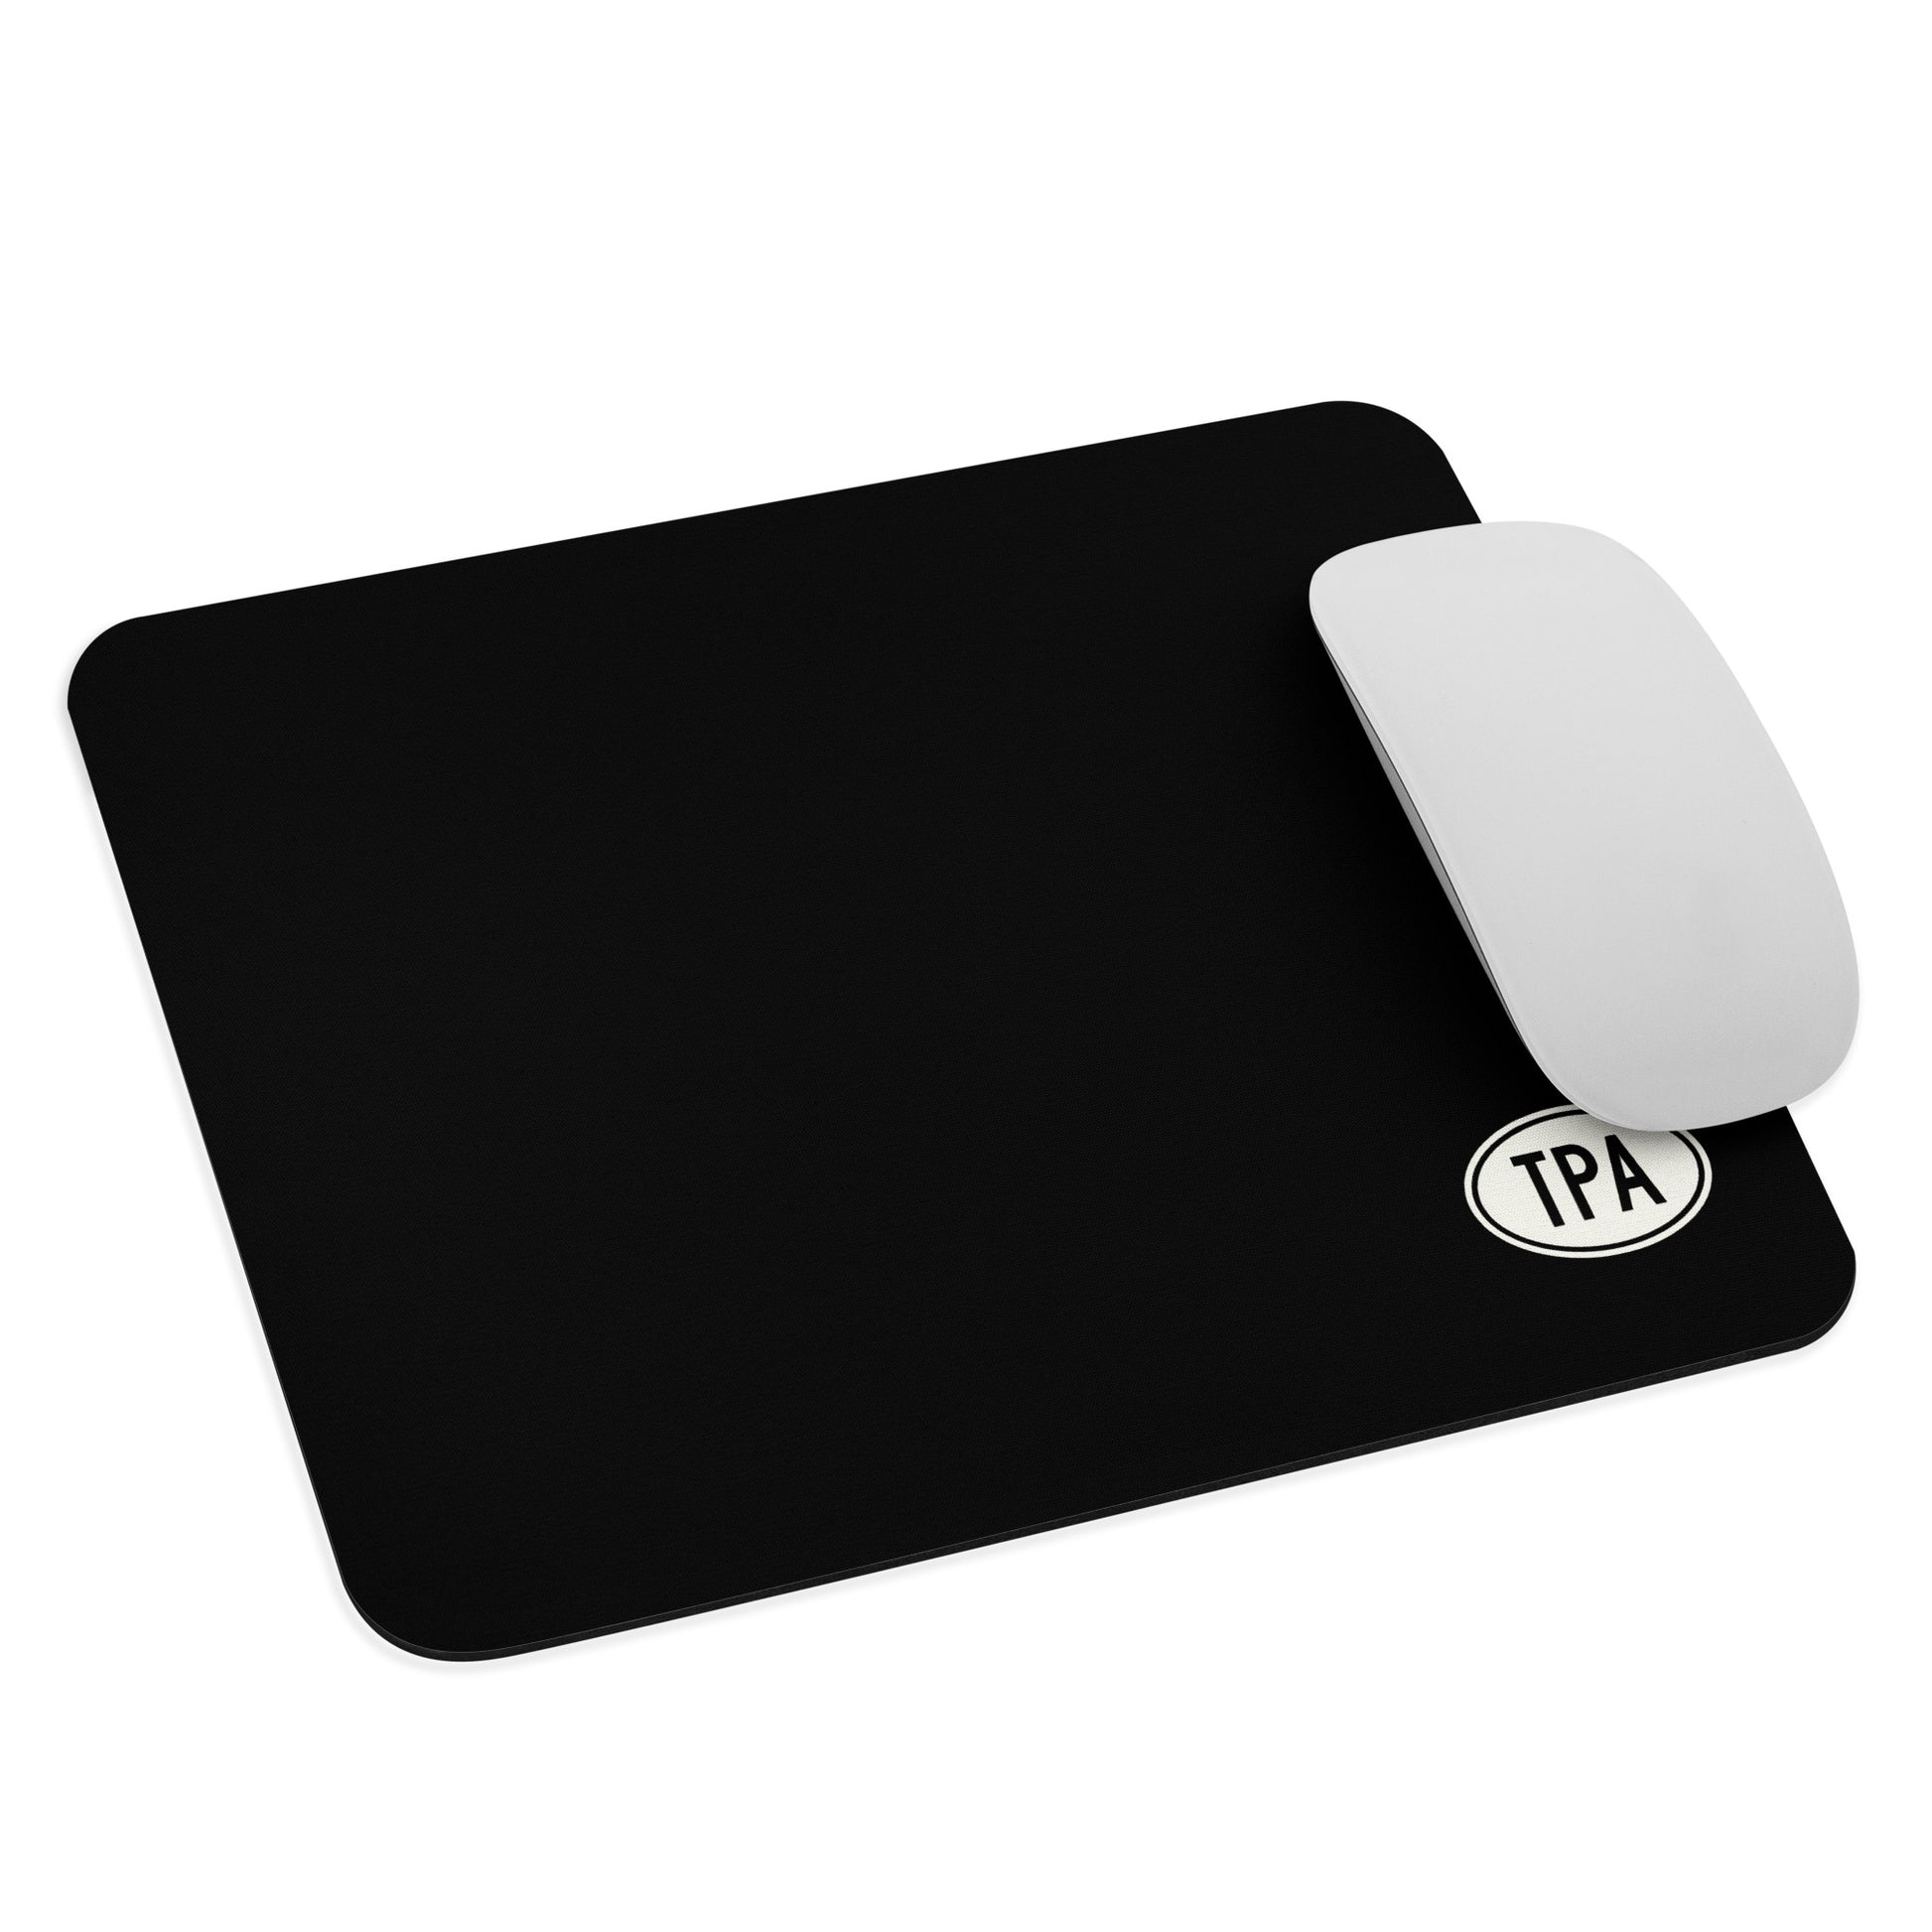 Unique Travel Gift Mouse Pad - White Oval • TPA Tampa • YHM Designs - Image 03